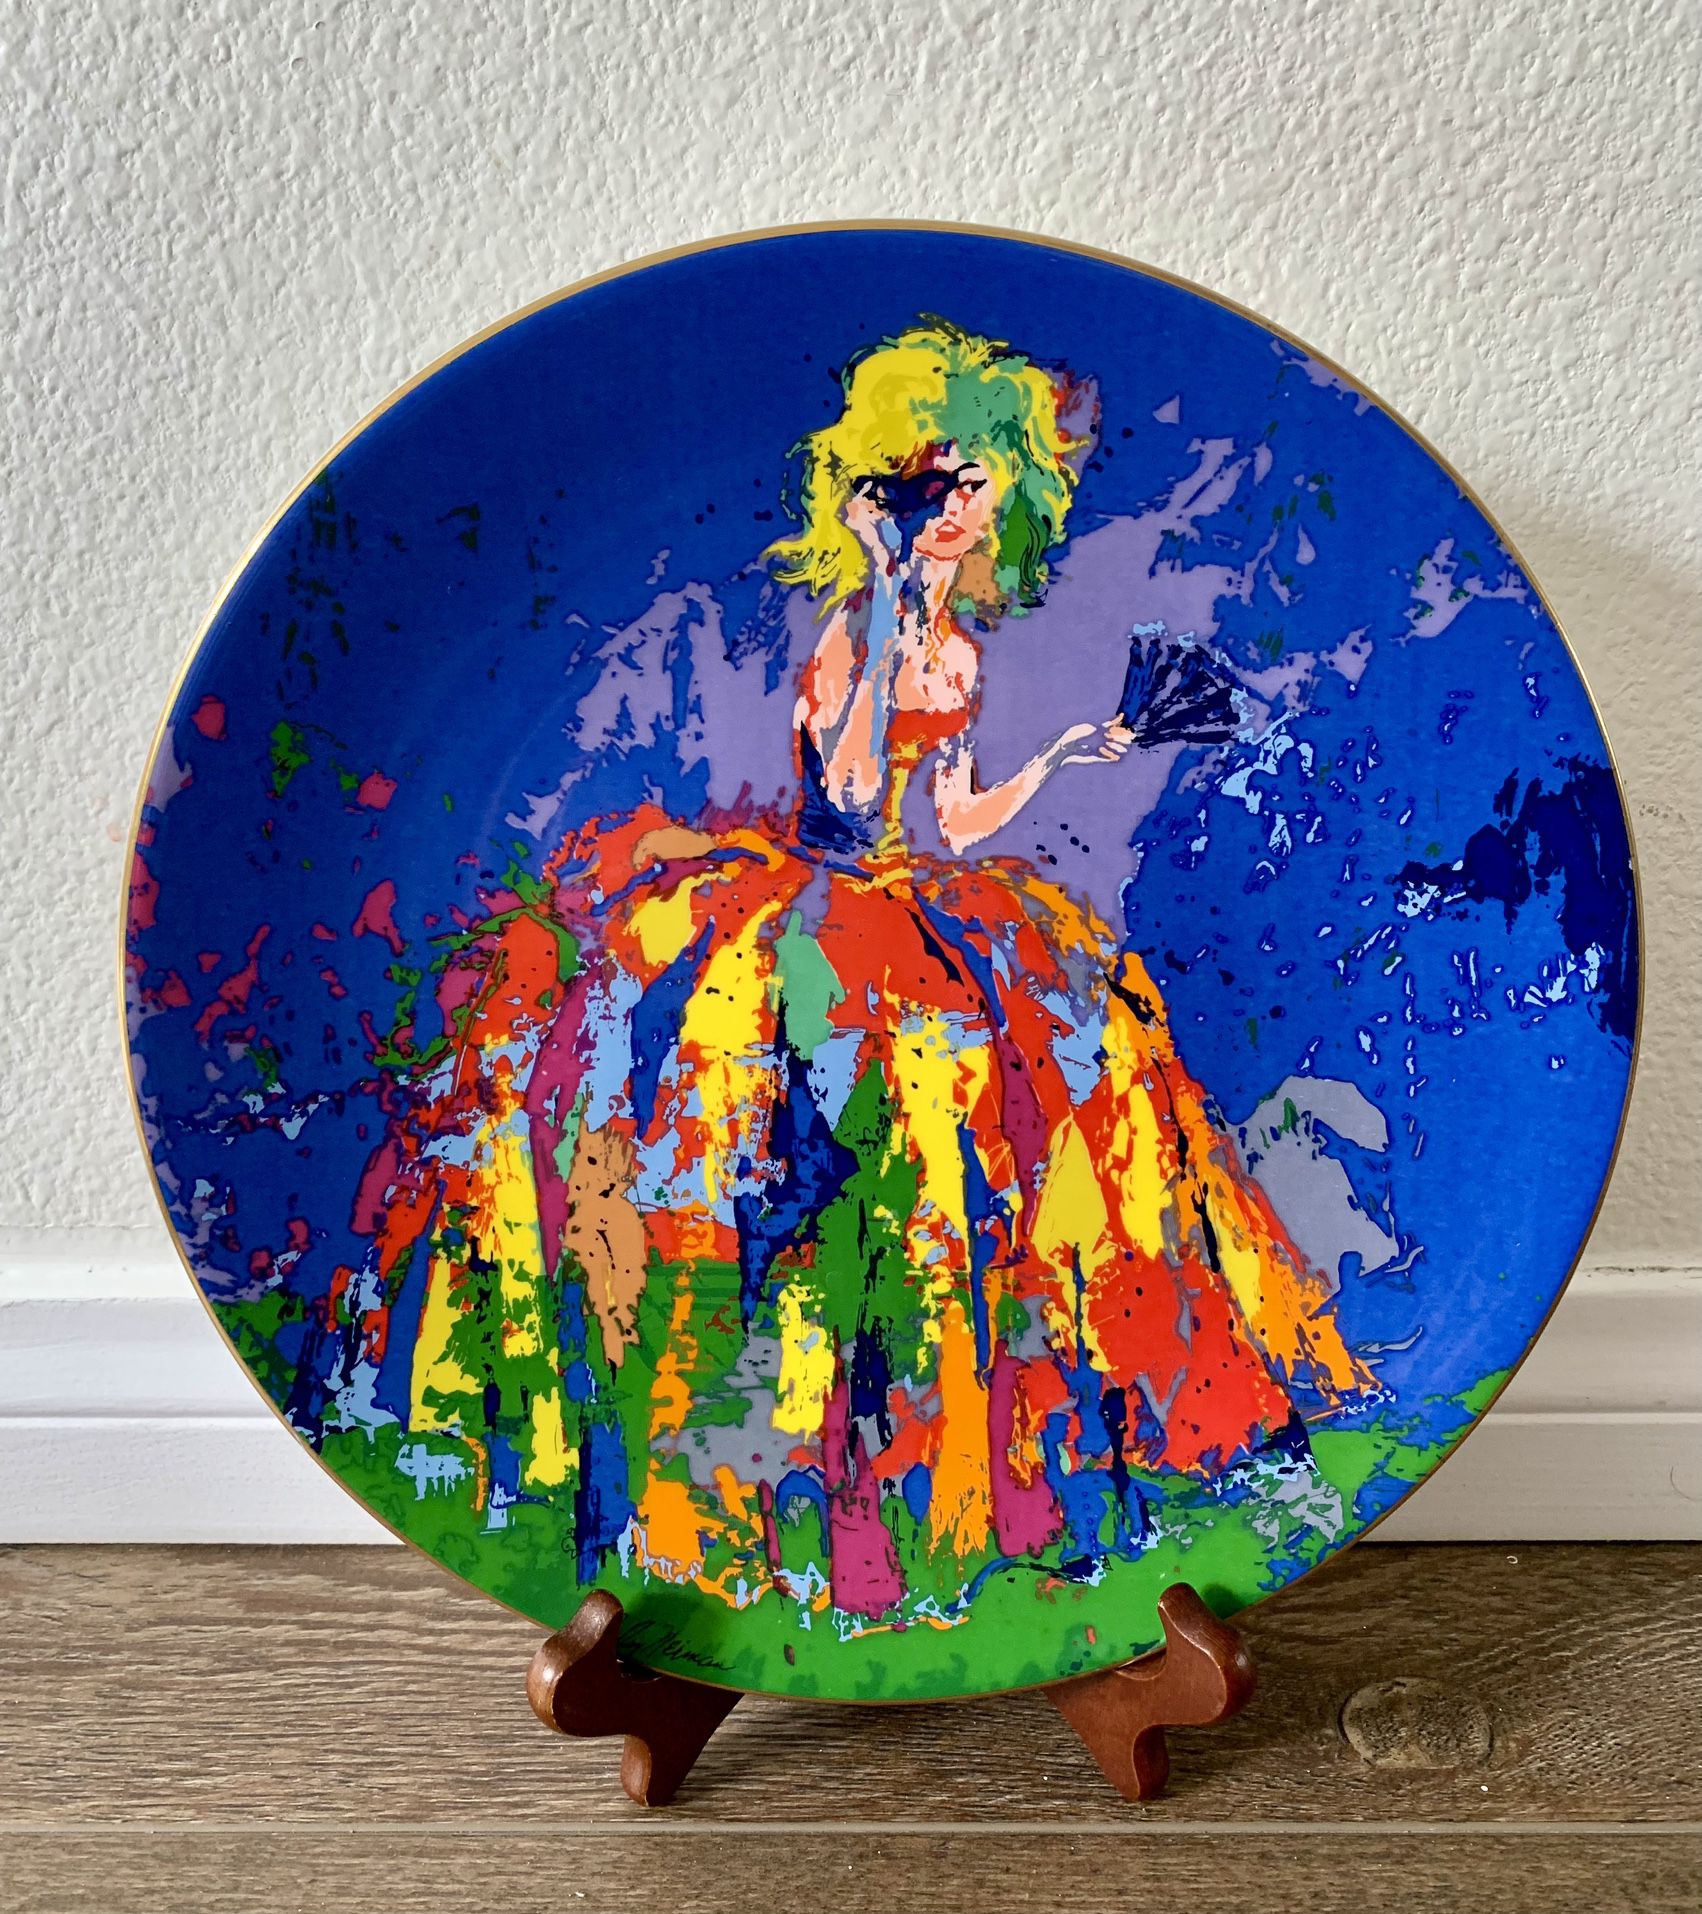 Royal Doulton Signed Leroy Neiman Columbia Collection Plate 10” #1894 Of 15000